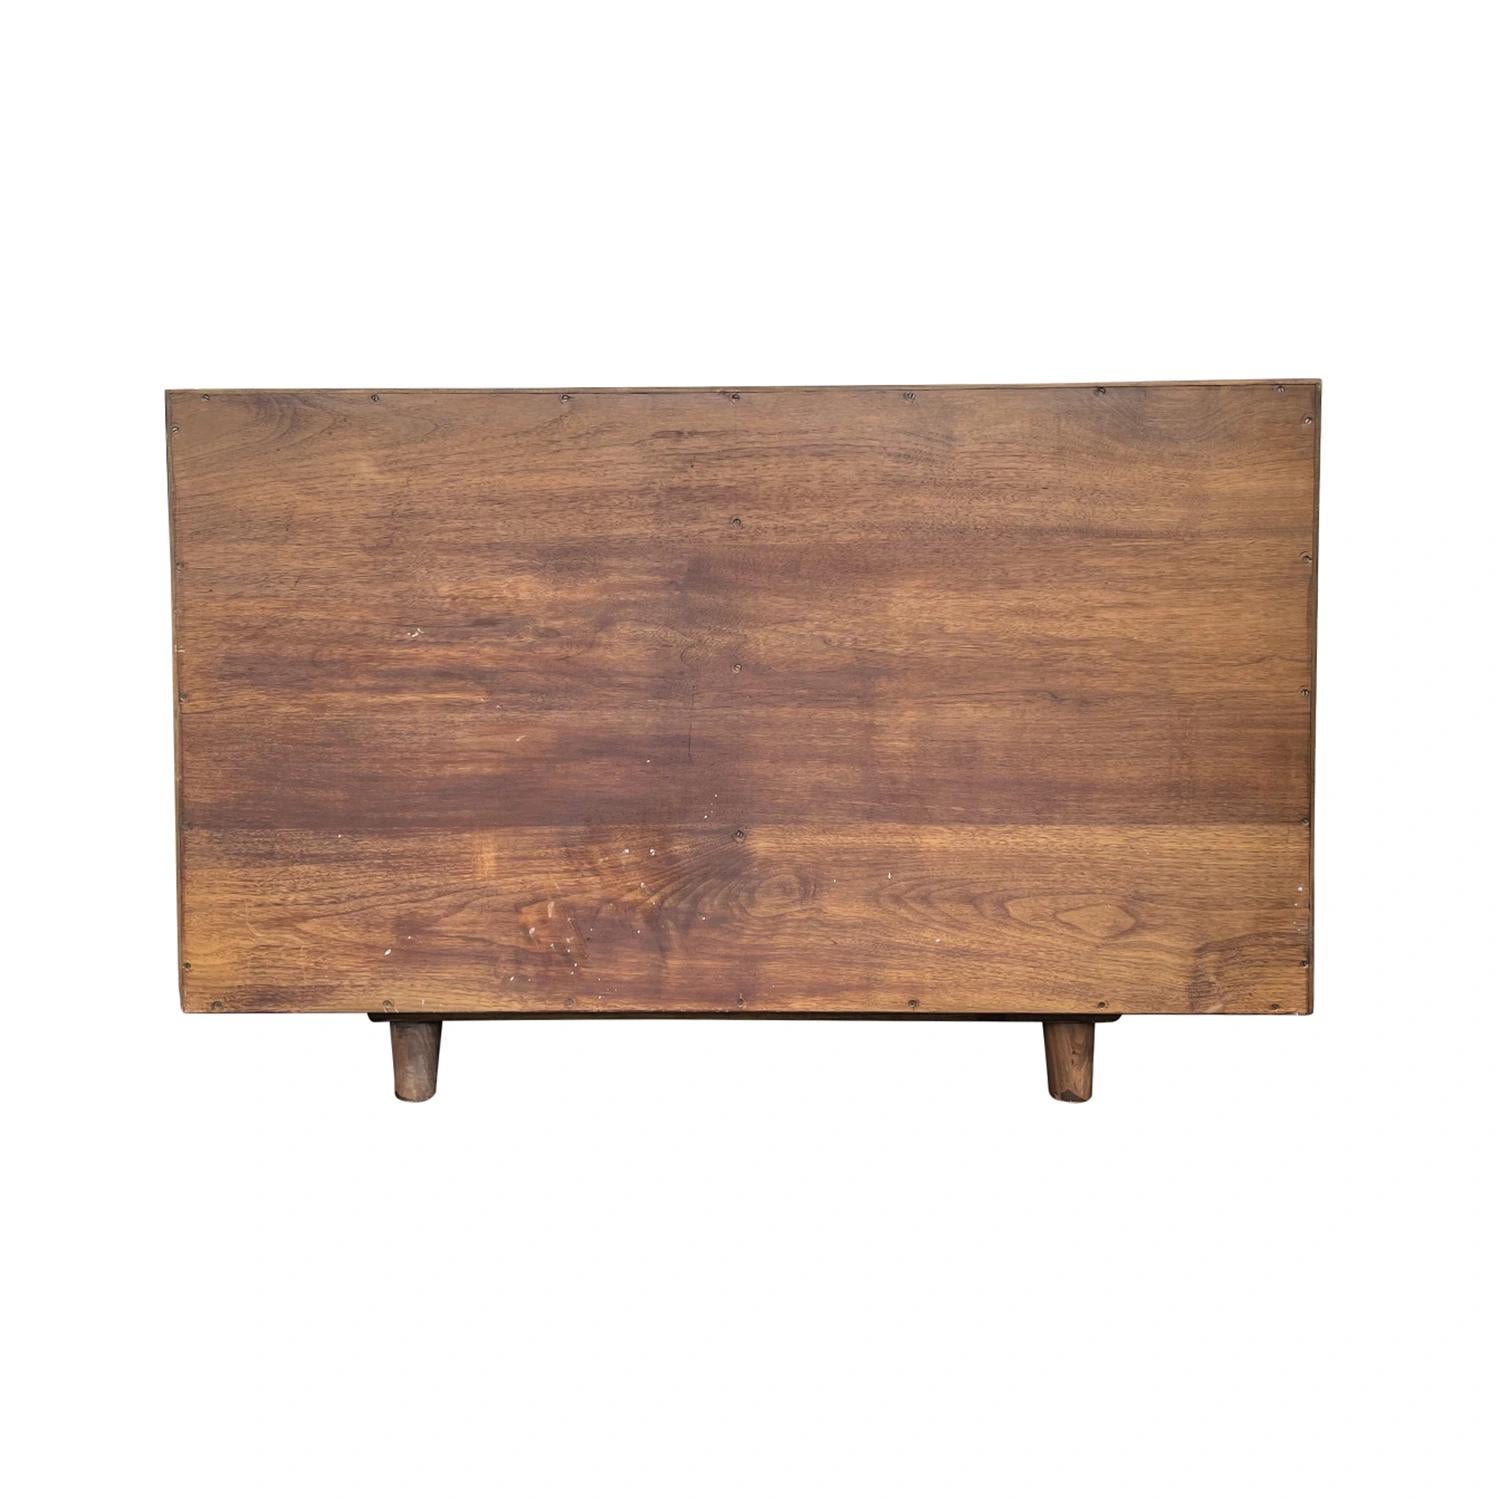 20th Century Brown Italian Walnut M. Singer & Sons Dresser, Cabinet by Gio Ponti For Sale 4